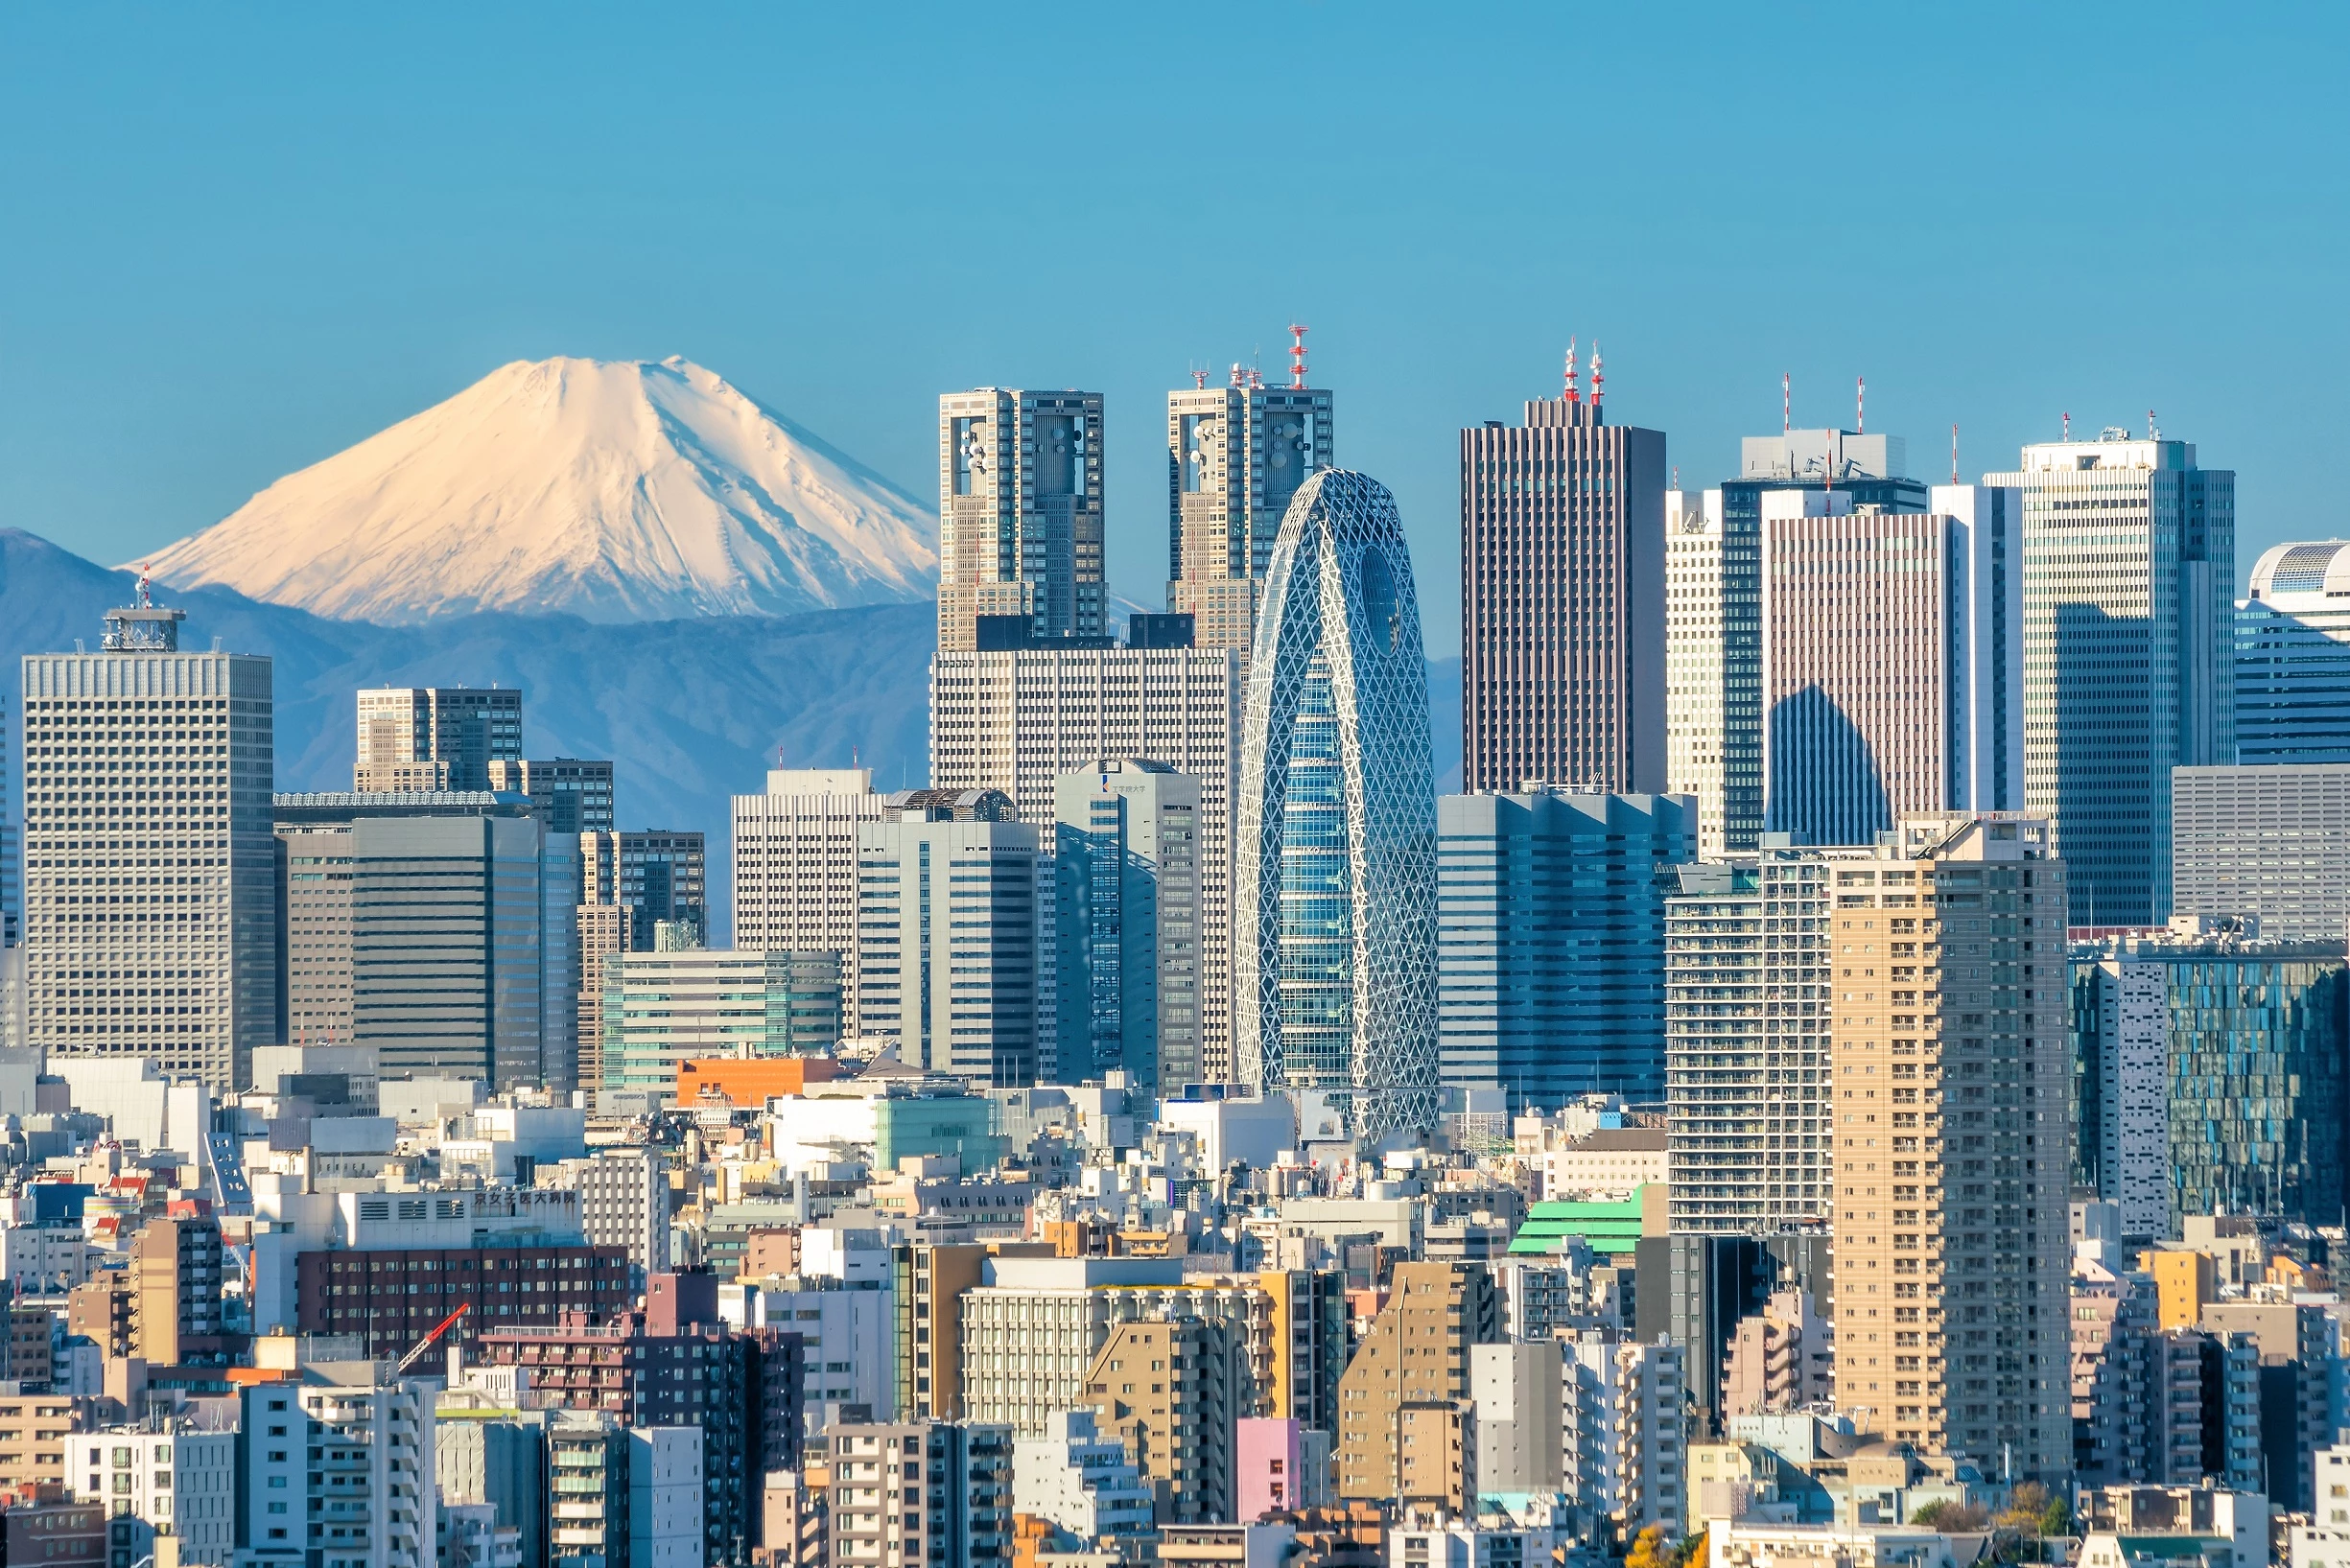 Tokyo, Europe's top travel destination for 2020, according to eDreams ODIGEO